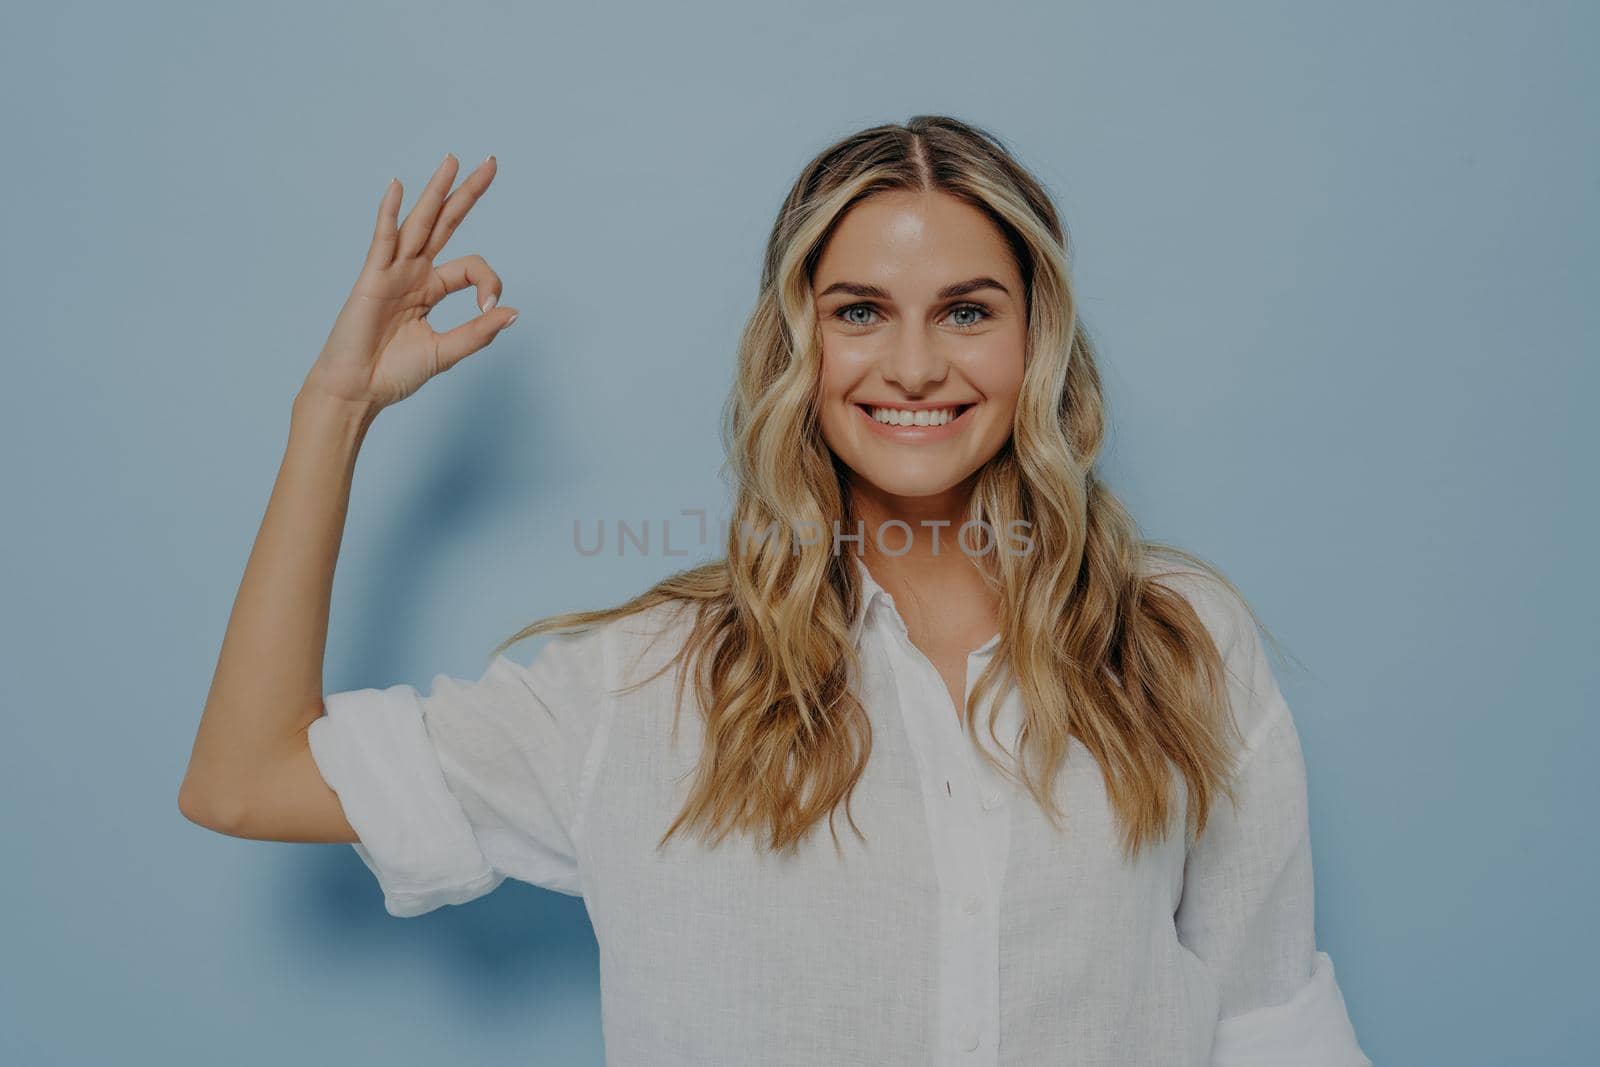 Happy smiling blonde woman showing ok gesture with her hand while smiling, looking forward to having fun and relaxing, standing next to light blue wall. Body language concept